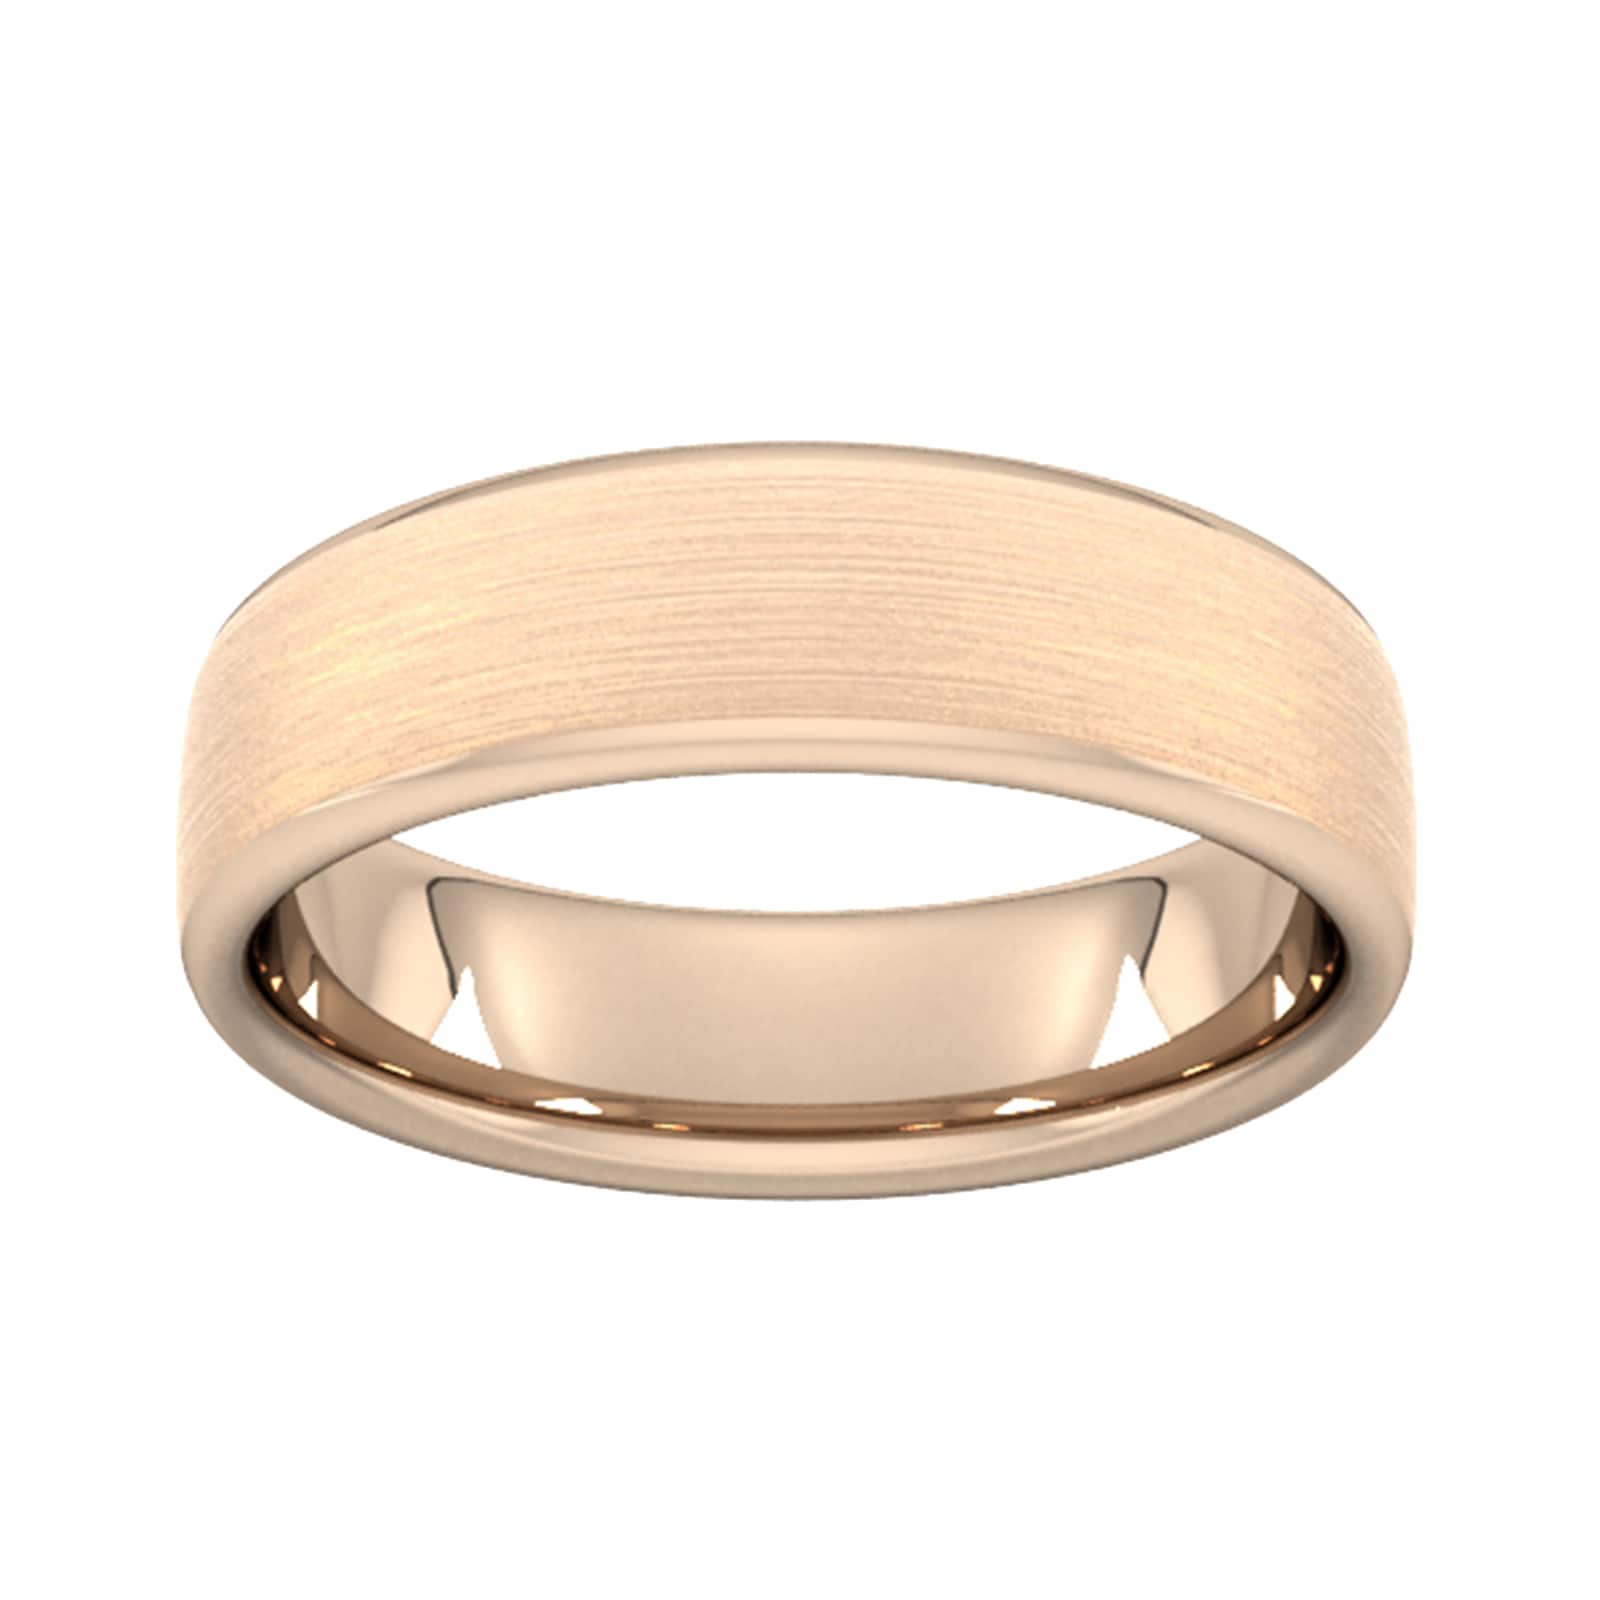 6mm Traditional Court Standard Matt Finished Wedding Ring In 18 Carat Rose Gold - Ring Size S